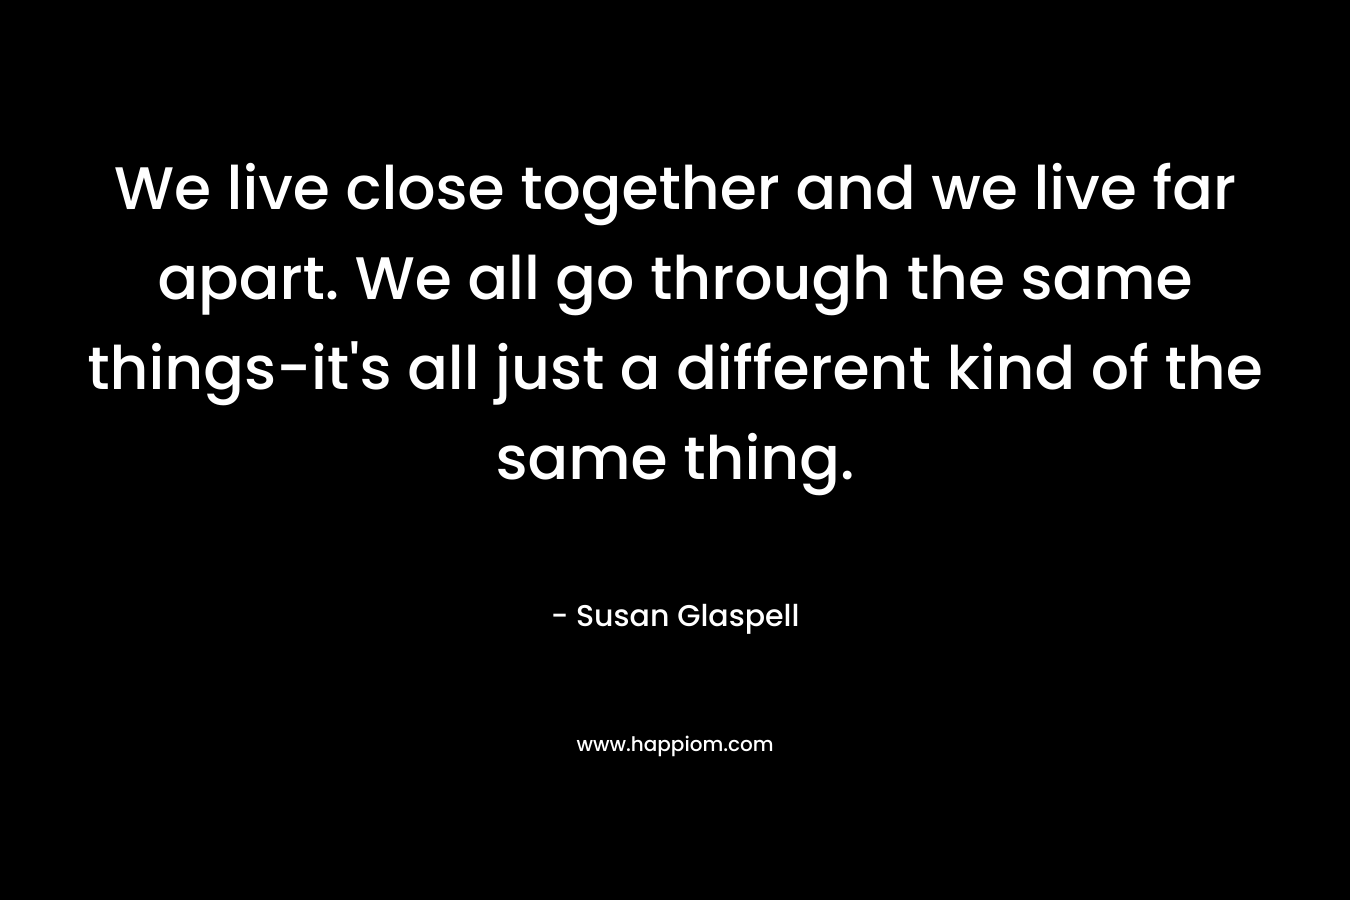 We live close together and we live far apart. We all go through the same things-it’s all just a different kind of the same thing. – Susan Glaspell